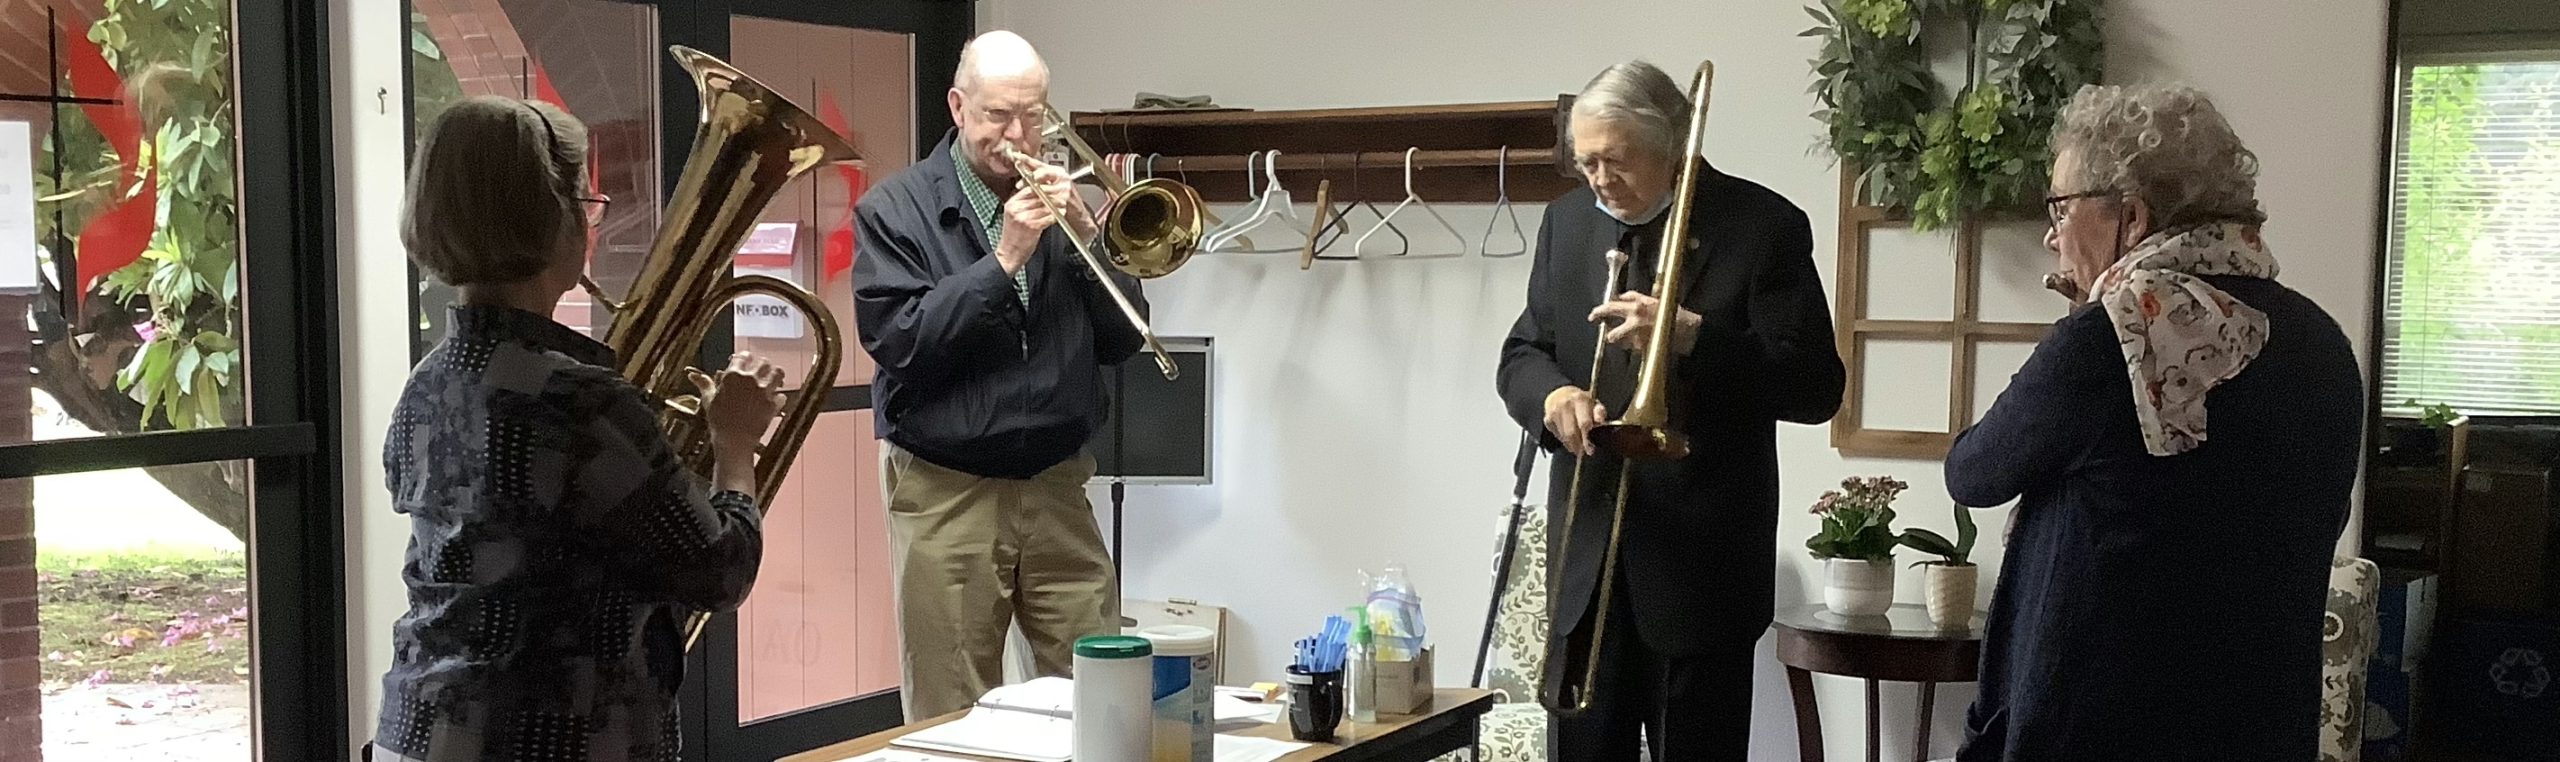 Four horn players warming up in narthex